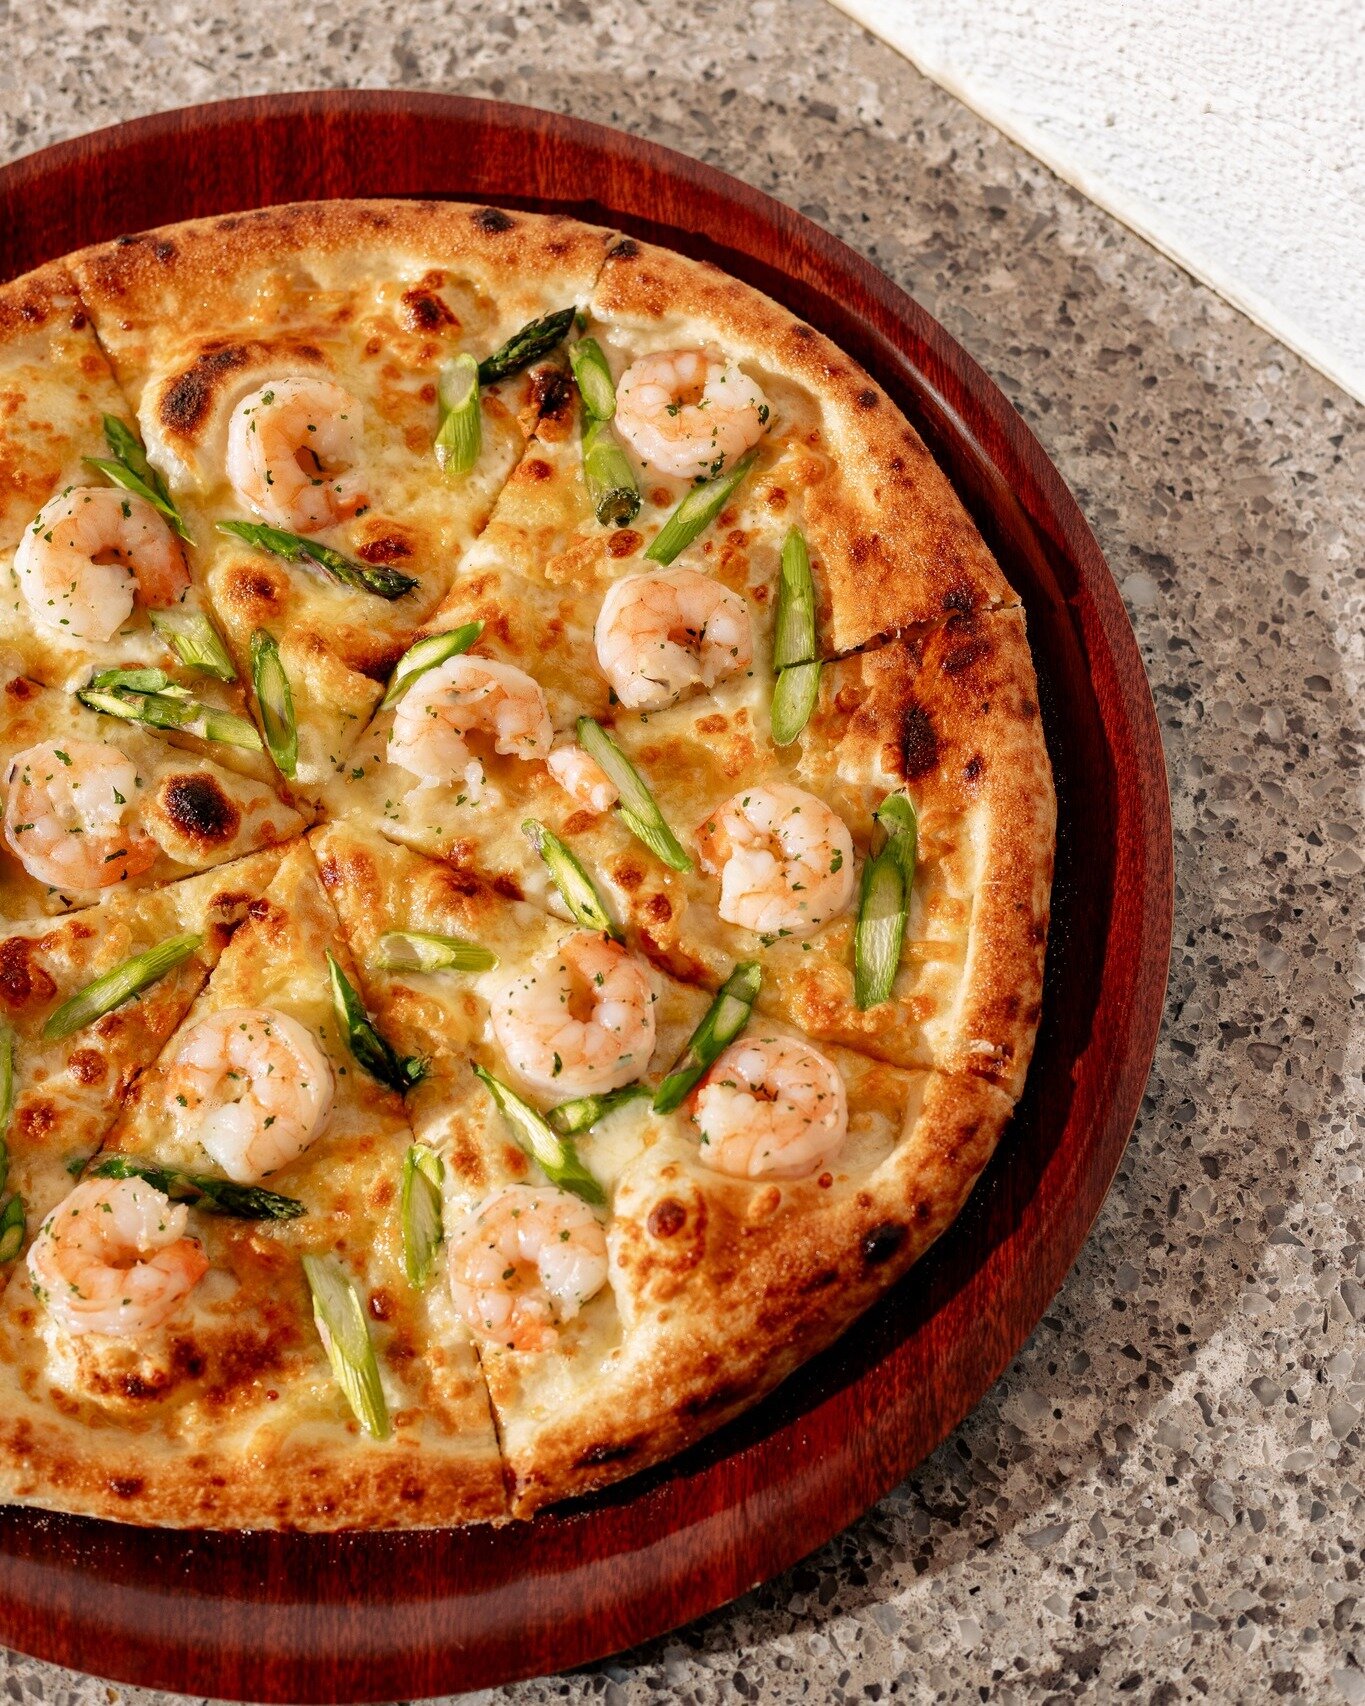 Ready for something new? We've got you covered with Lorenzo's Garlic Prawn pizza! This delicious dish features mozzarella, garlic prawns and asparagus. 🍕🍕🍕

Come on out to Eagle Hawk tonight &amp; see what all the fuss is about, or order takeaway 